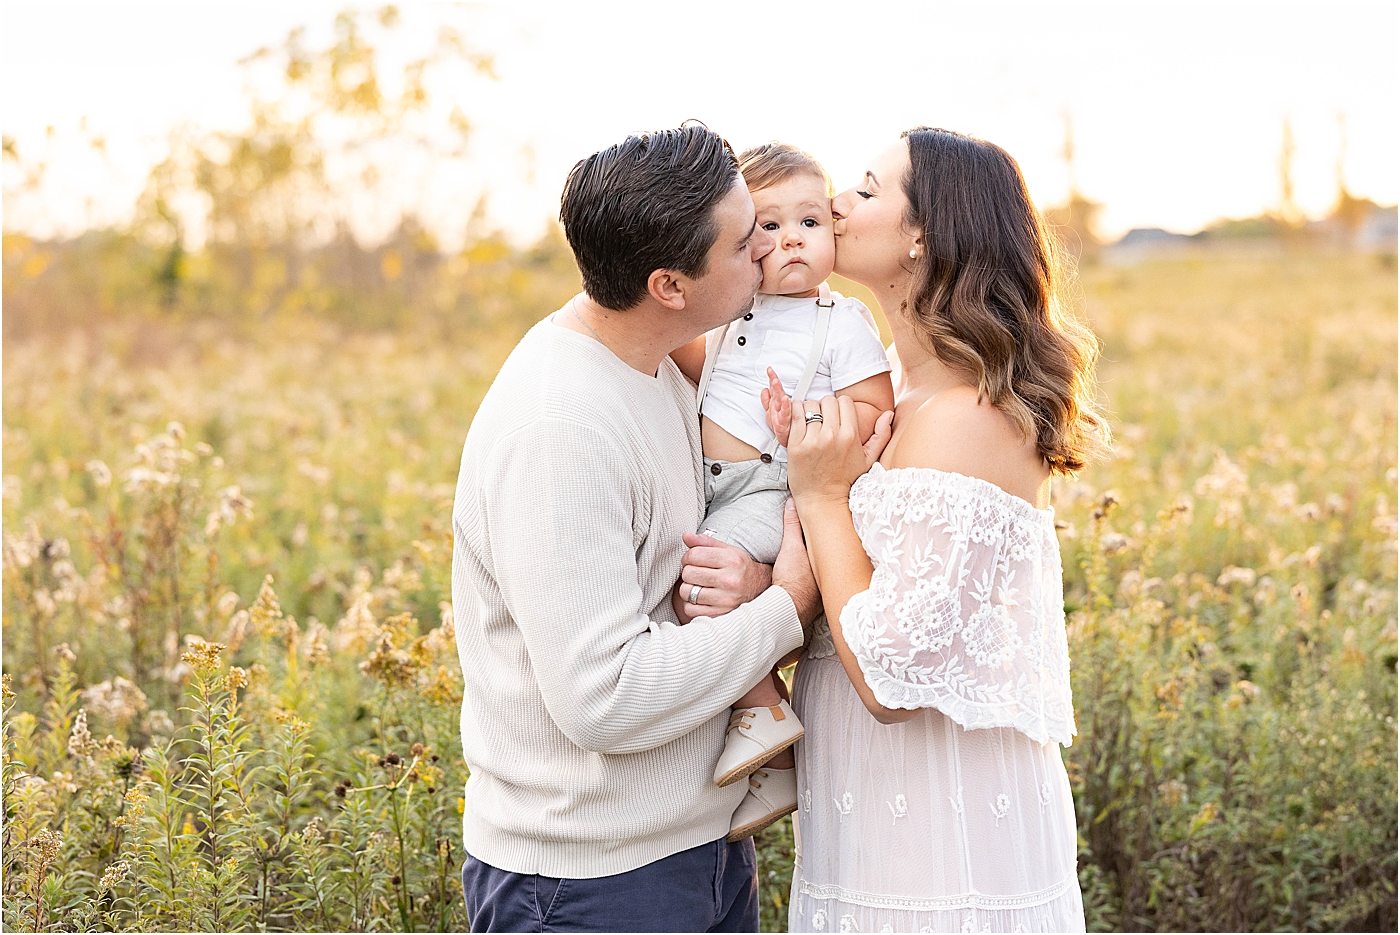 Family photoshoot in Geist with Lindsay Konopa Photography.